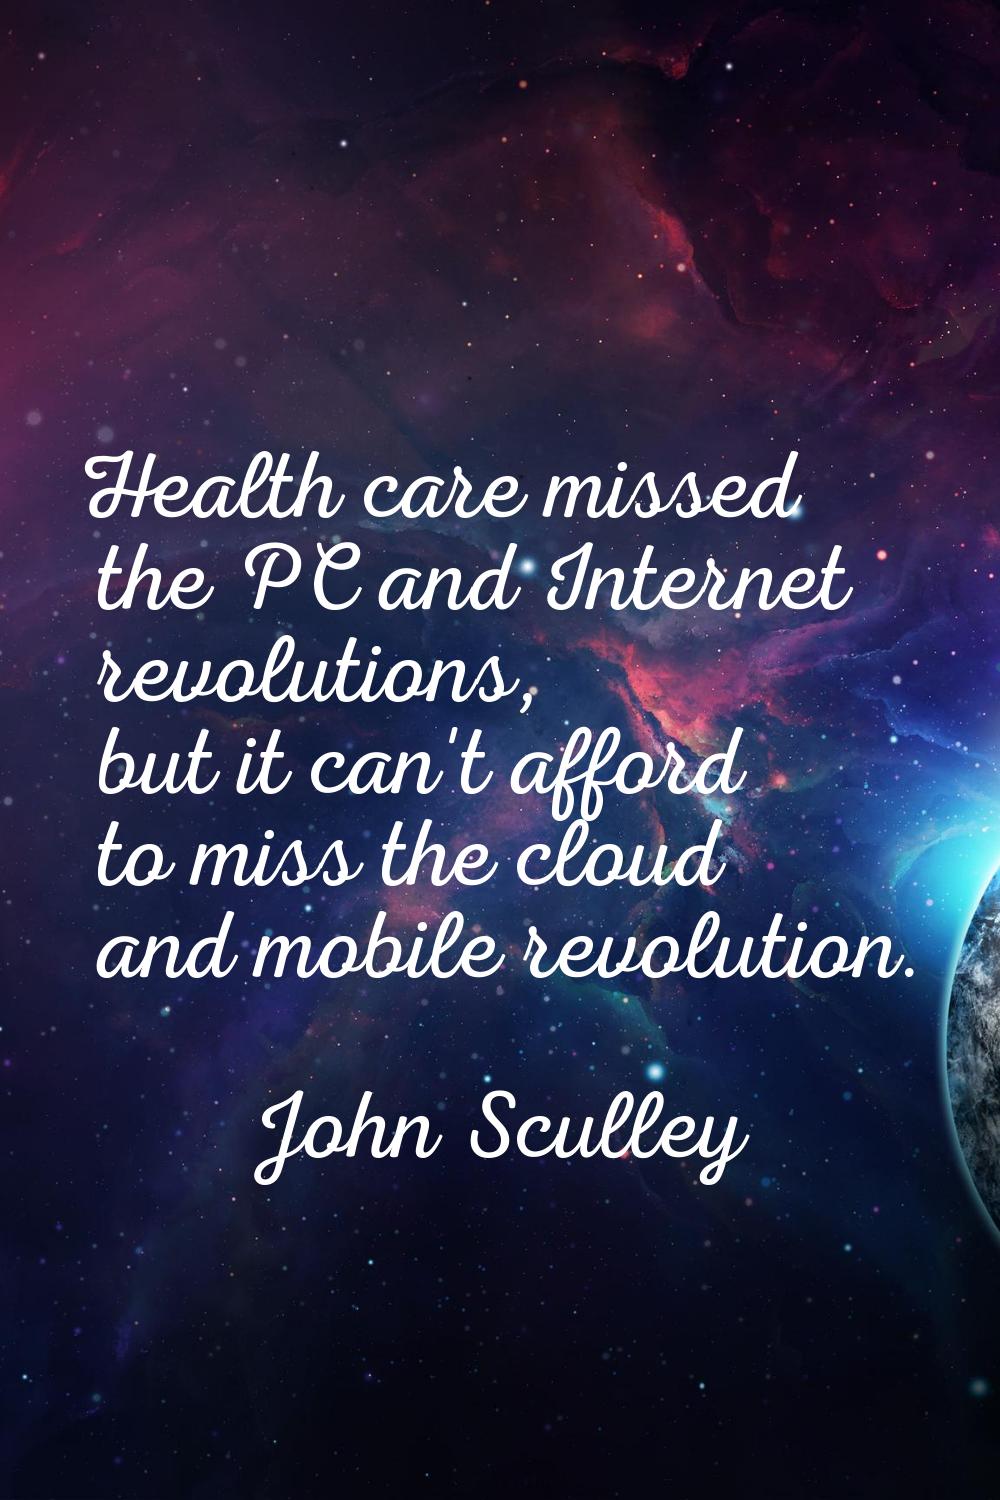 Health care missed the PC and Internet revolutions, but it can't afford to miss the cloud and mobil